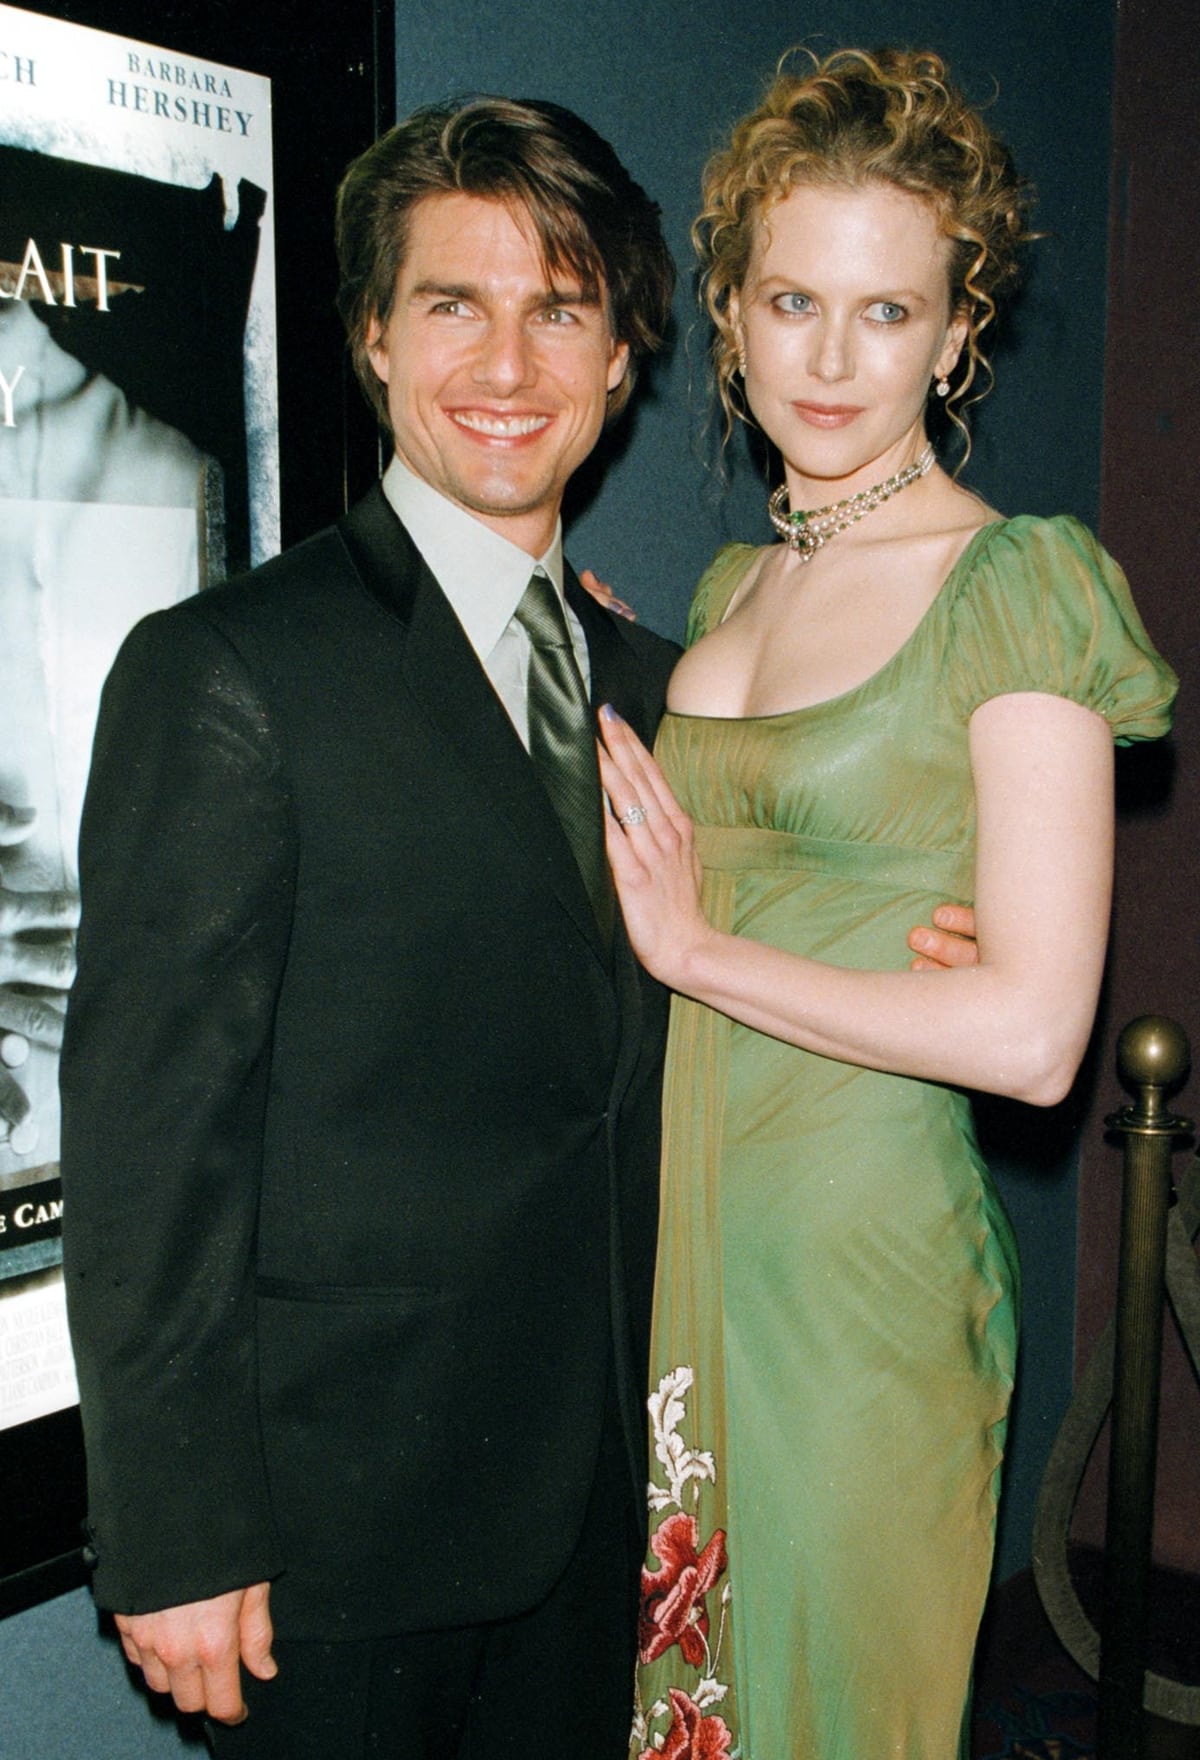 Nicole Kidman doesn't like being asked questions about her failed marriage to Tom Cruise